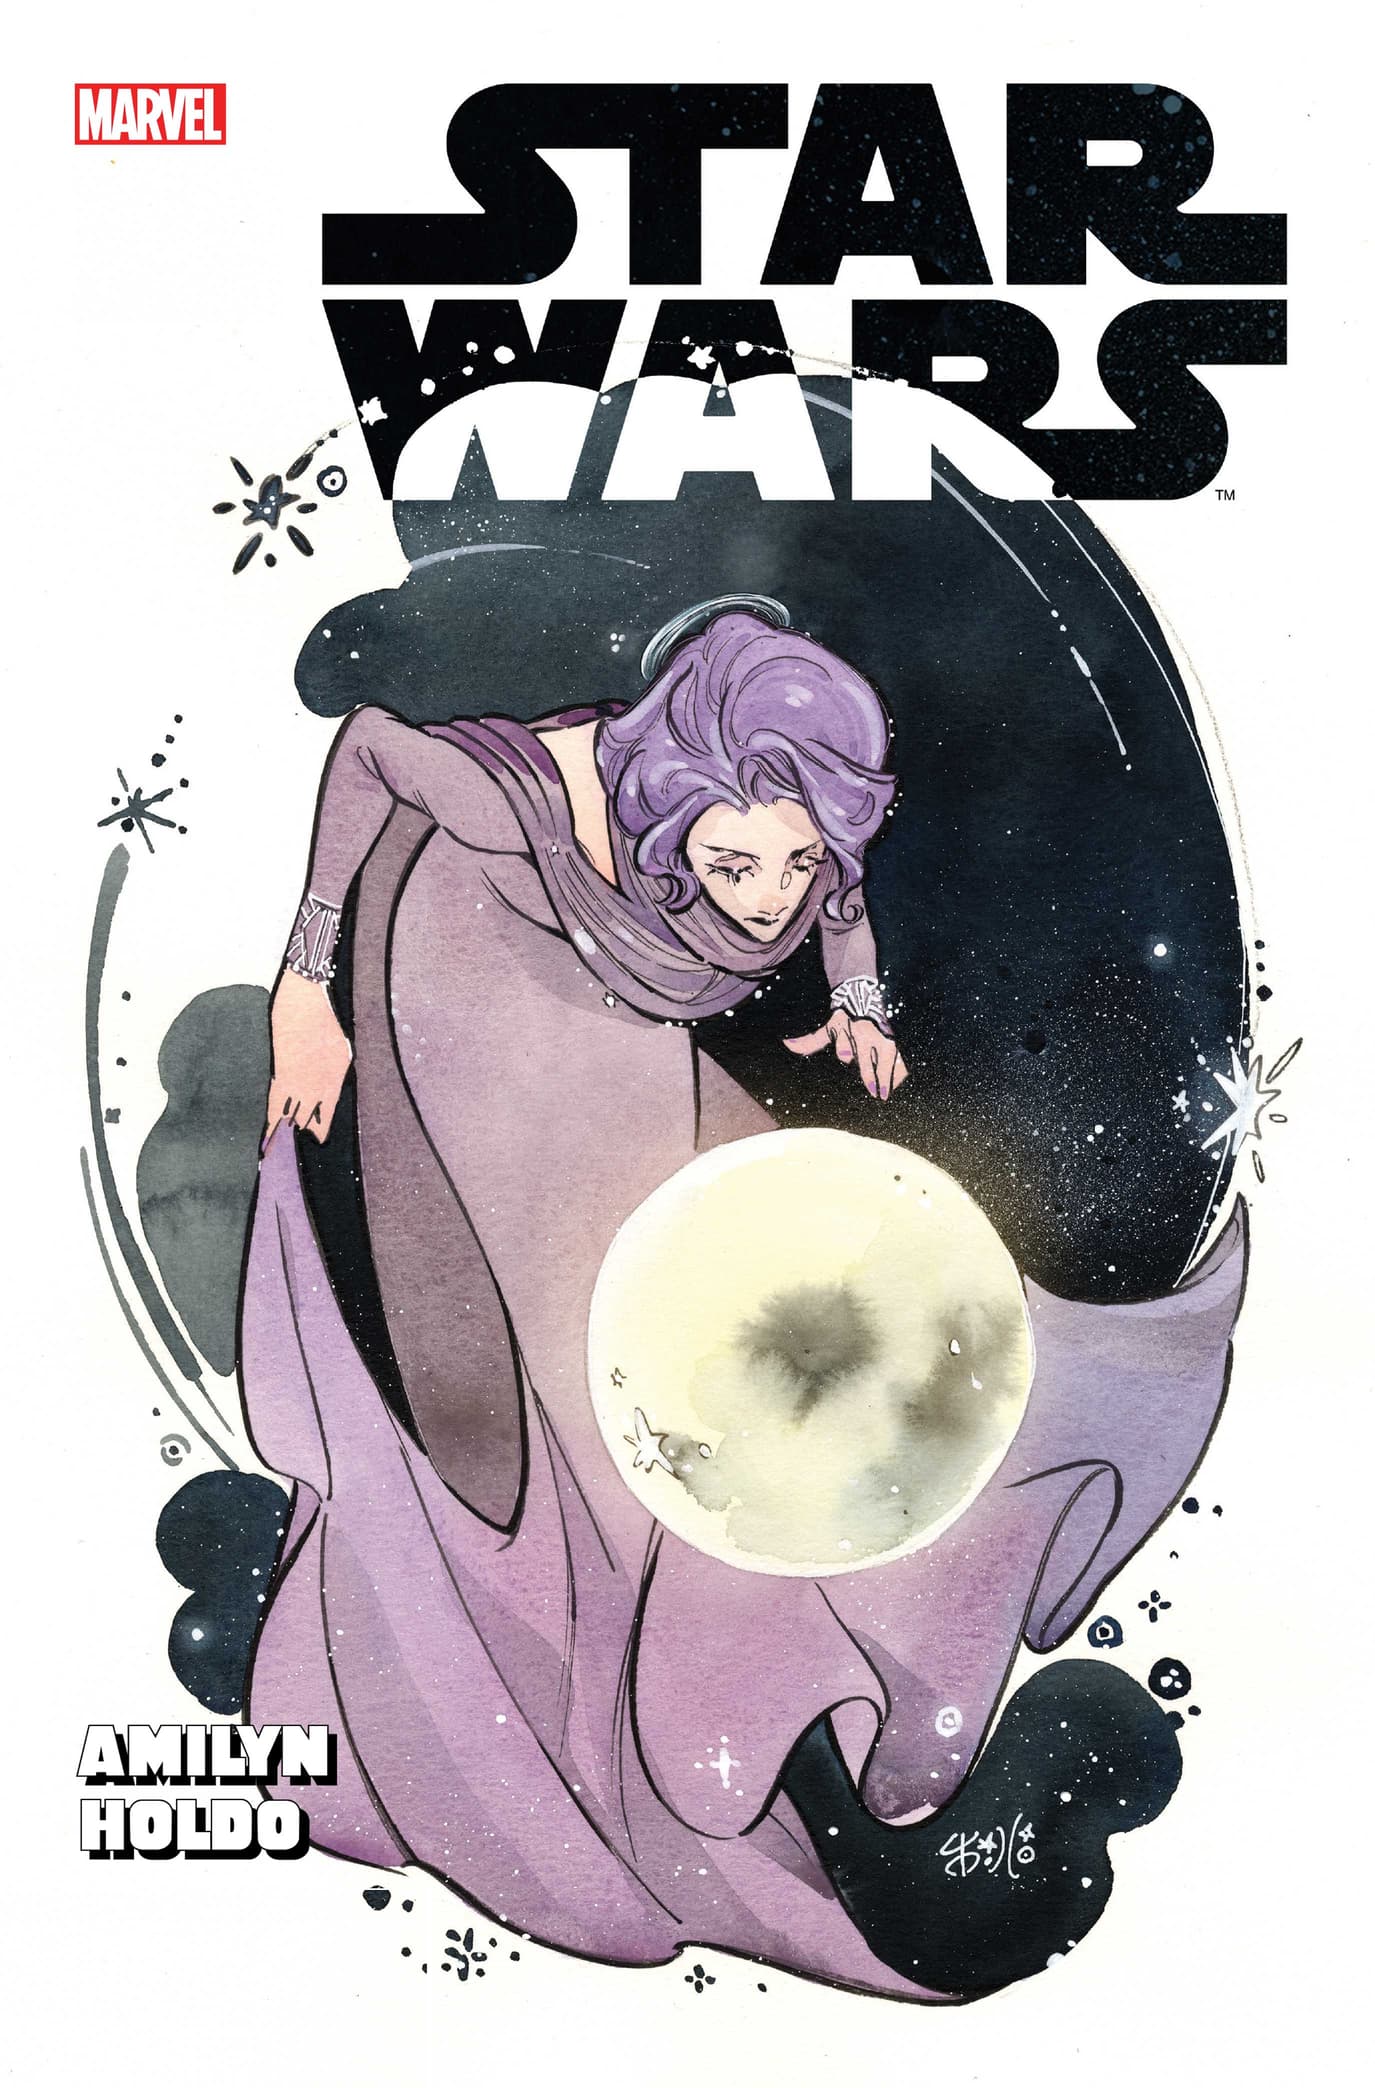 STAR WARS #32 WOMEN’S HISTORY MONTH VARIANT COVER by PEACH MOMOKO